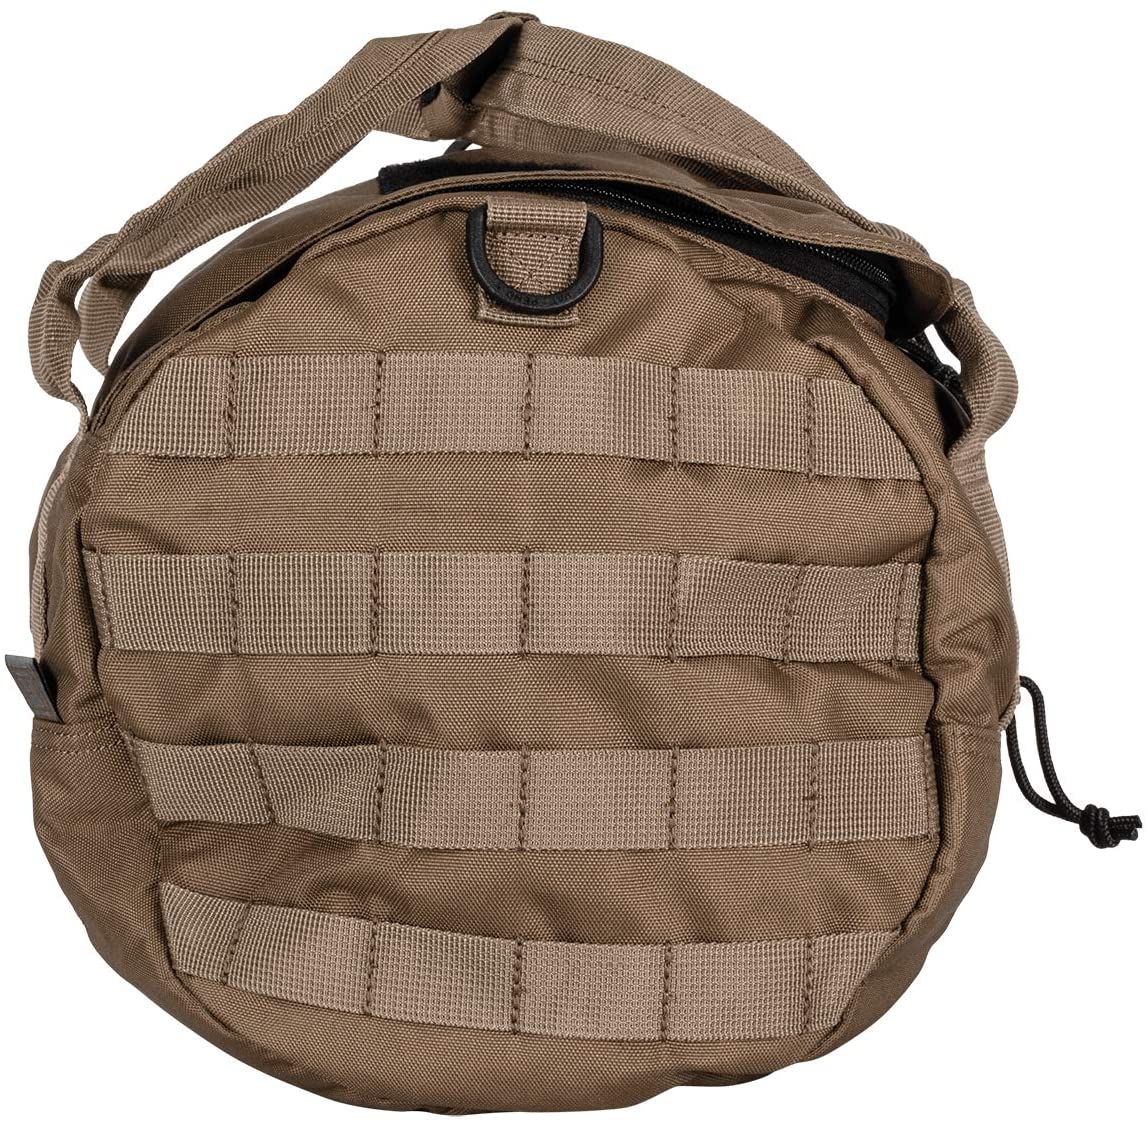 HD-2 Hunting and Tactical Duffle Bags3